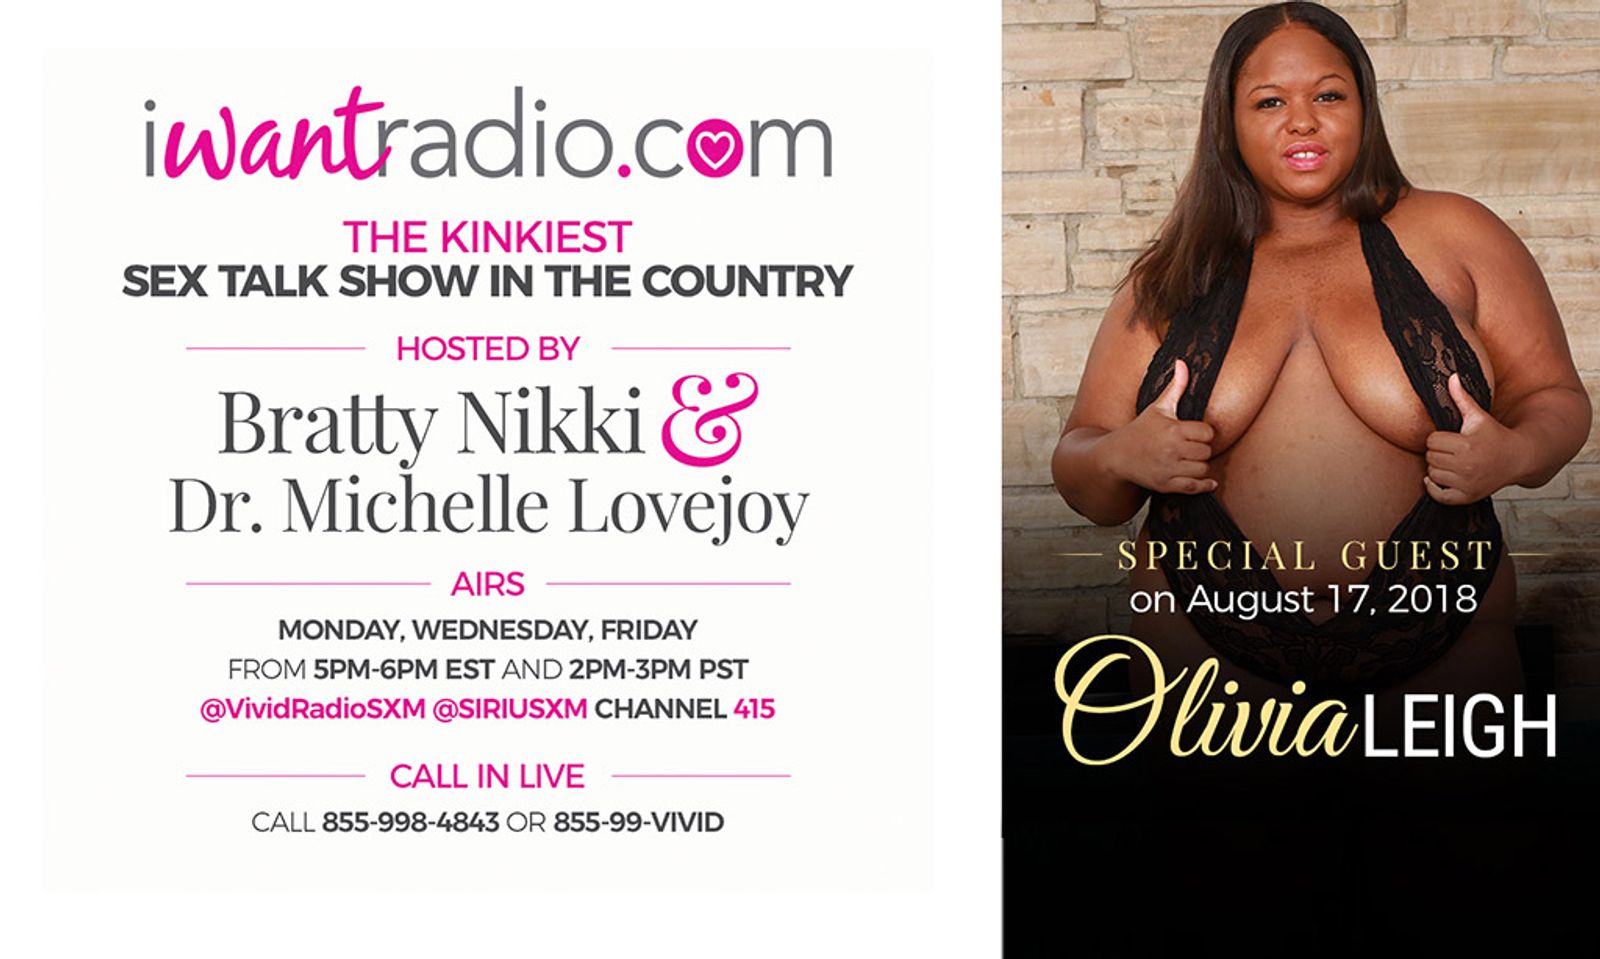 Clip Star Olivia Leigh Appearing on iWantRadio